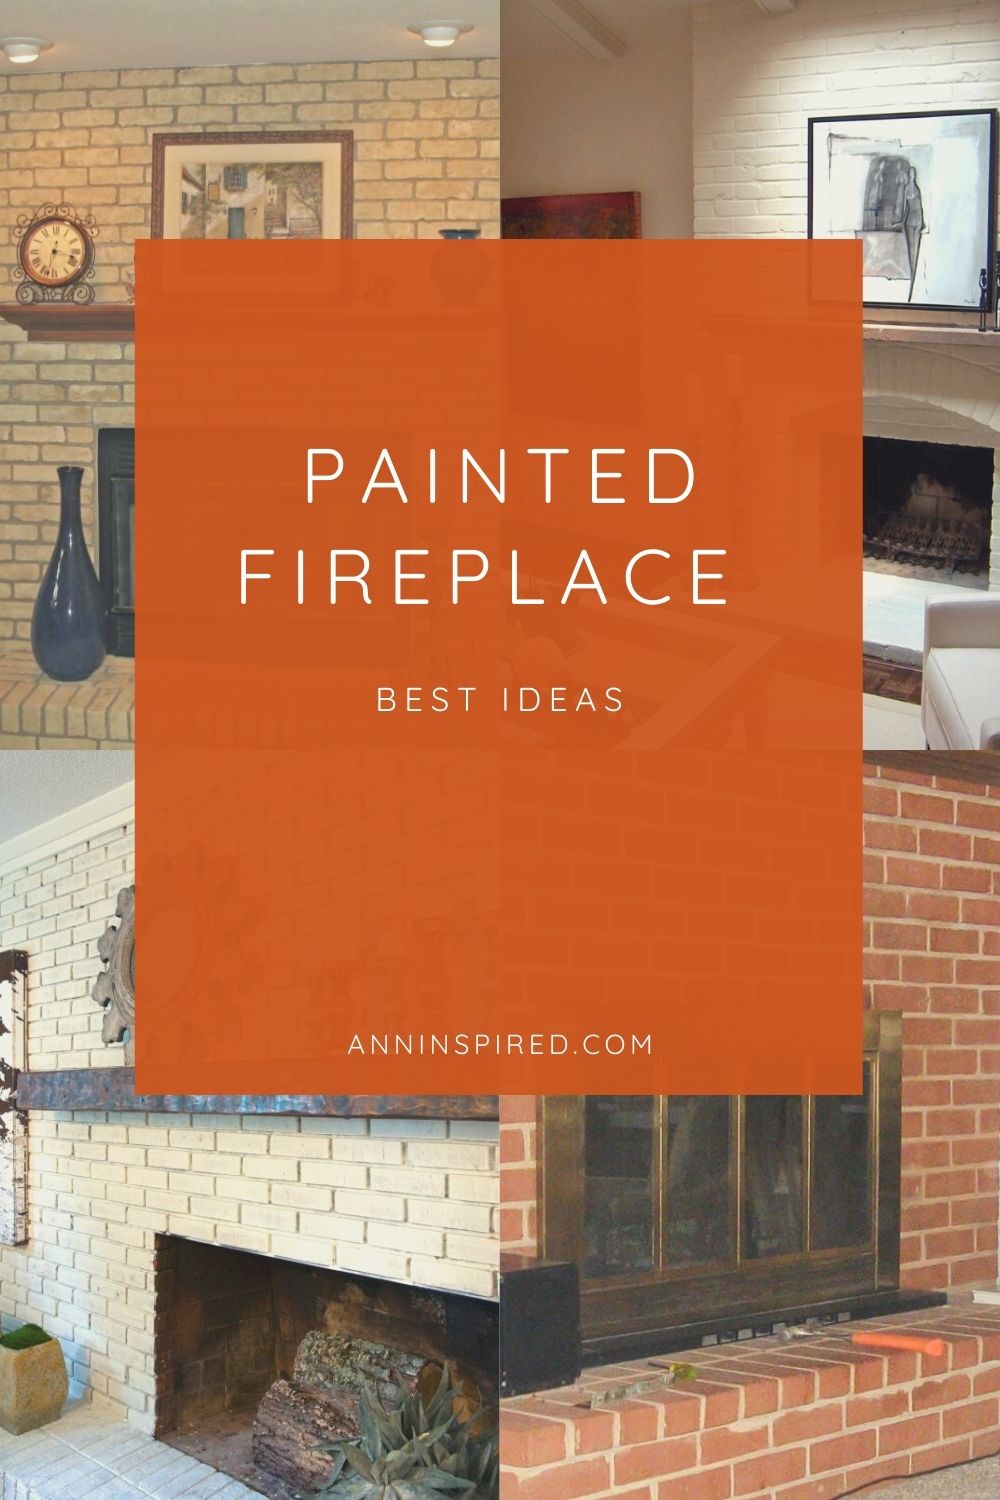 Best Painted Fireplace Ideas